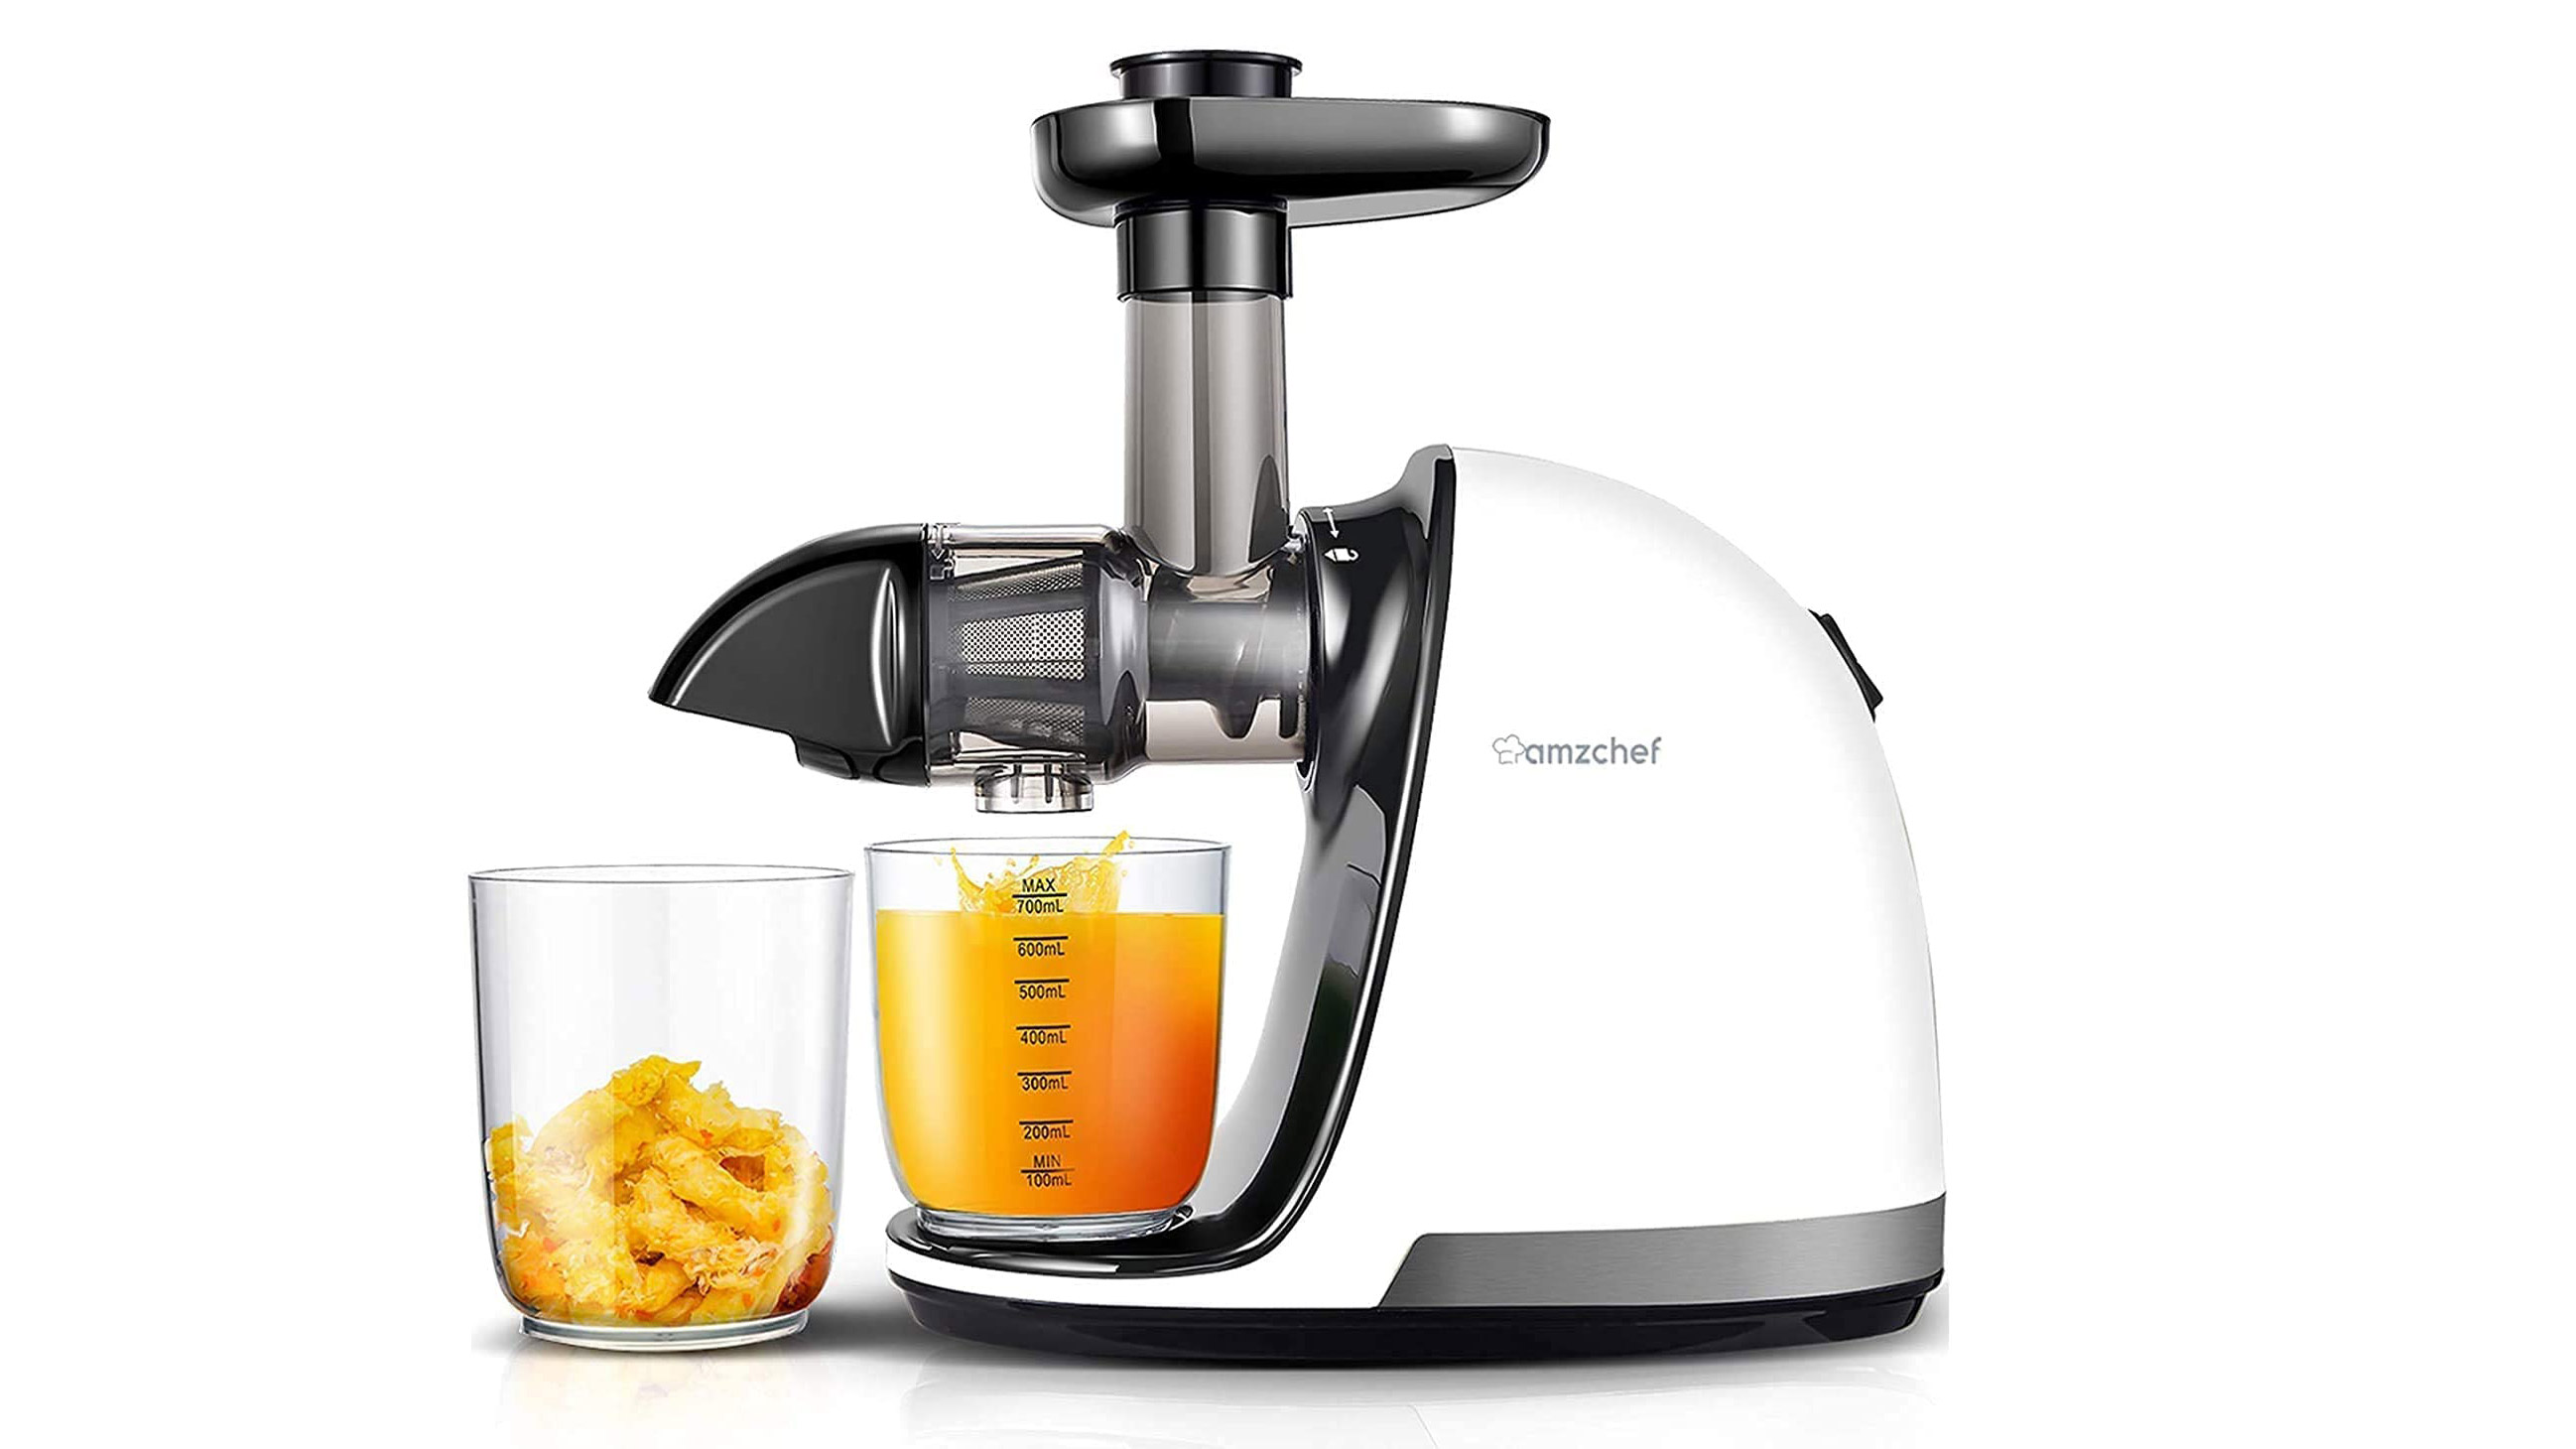 Amzchef ZM150 slow juicer on a white background with some freshly squeezed orange juice and the discarded pulp